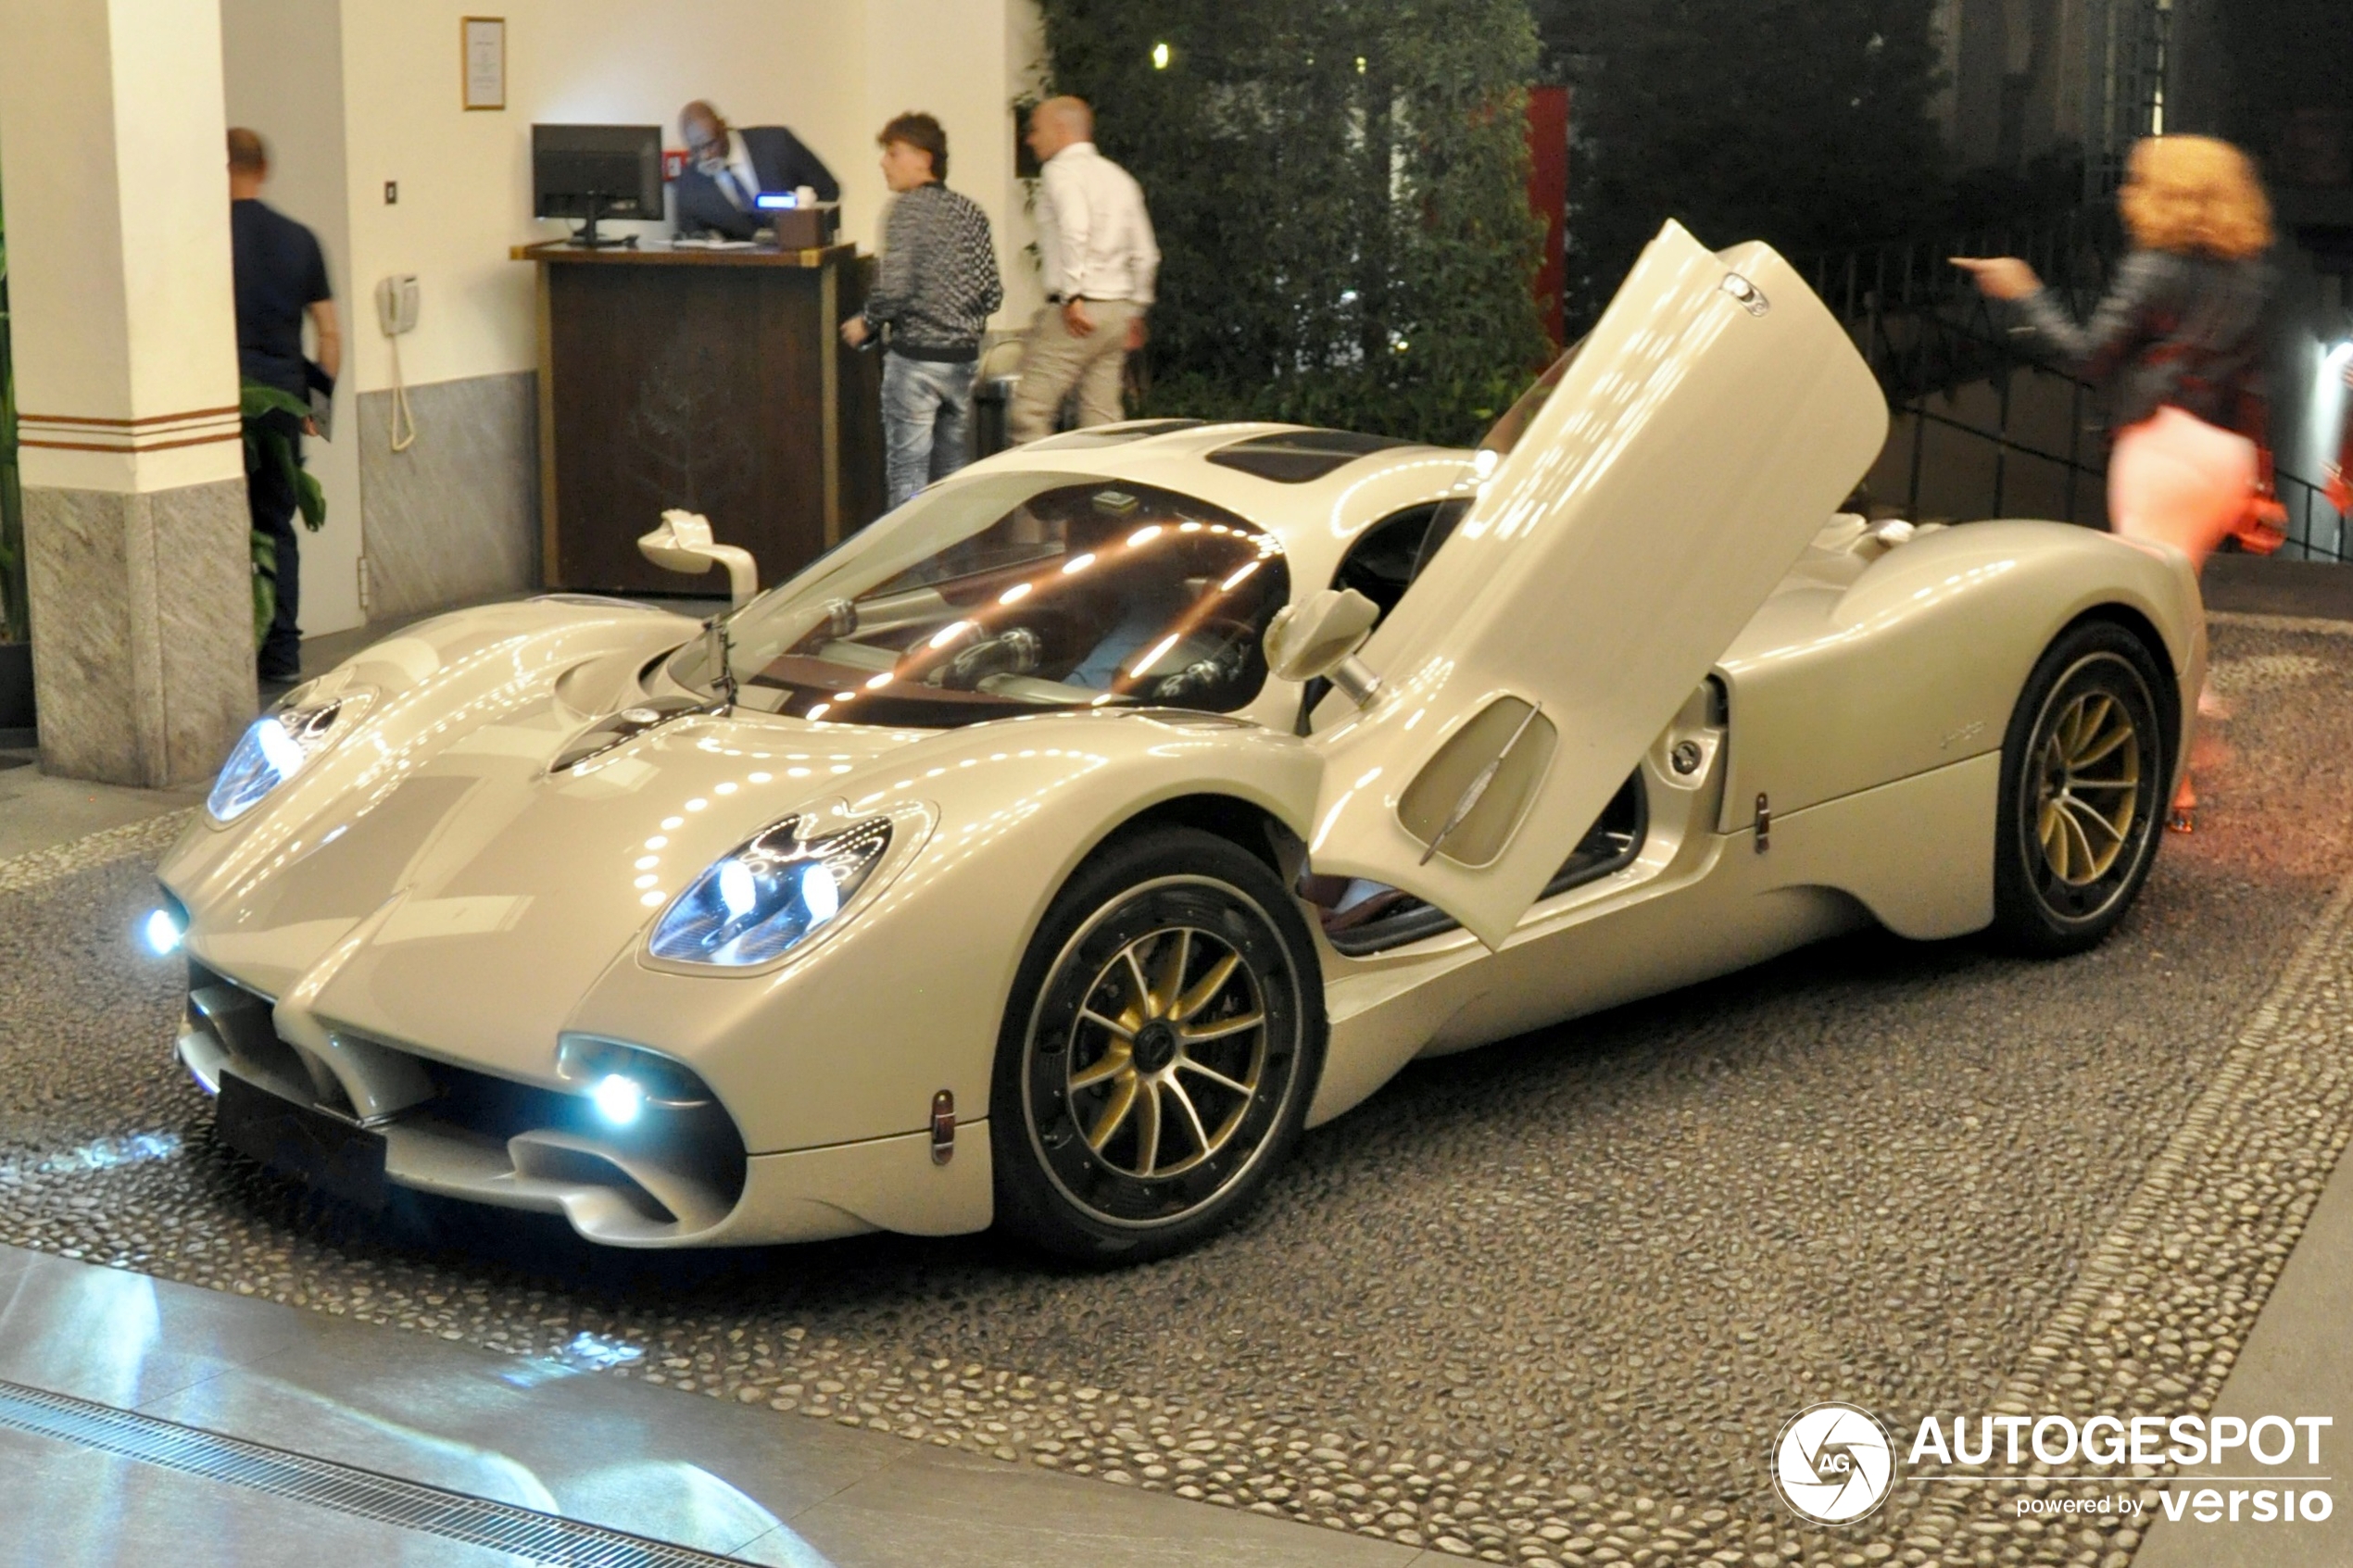 A Pagani Utopia shows up in Northern Italy